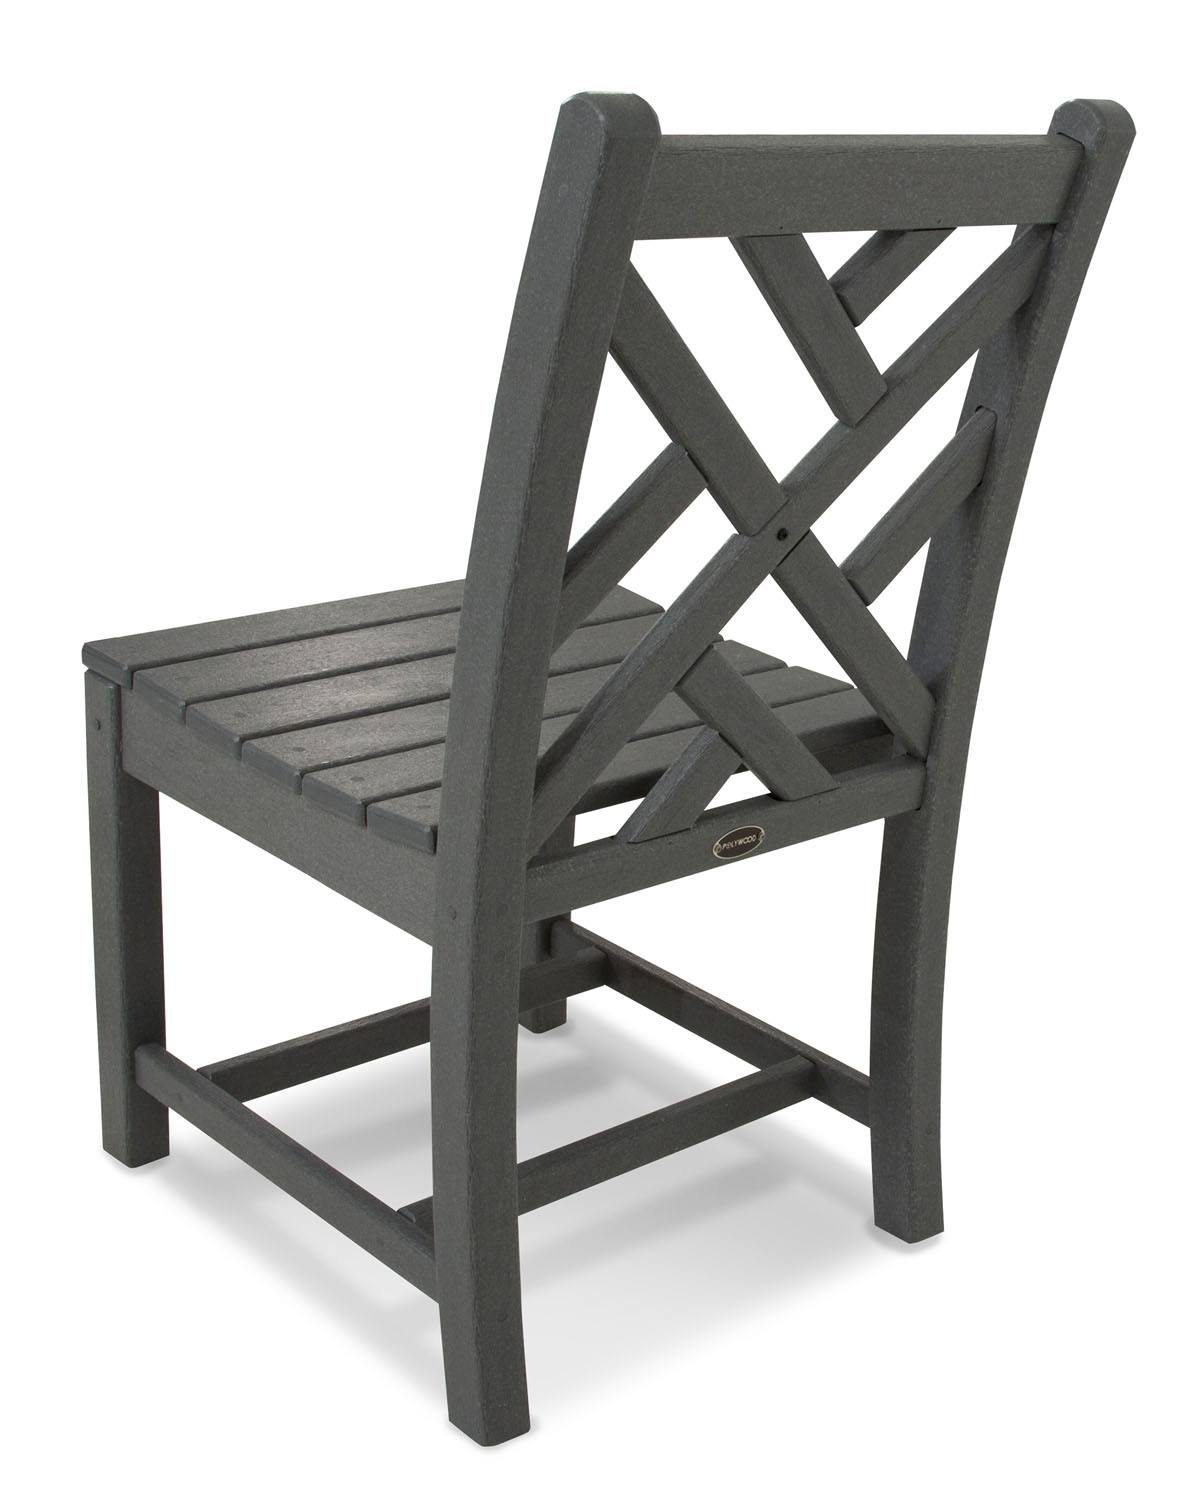 POLYWOOD® Chippendale Dining Side Chair - Slate Grey